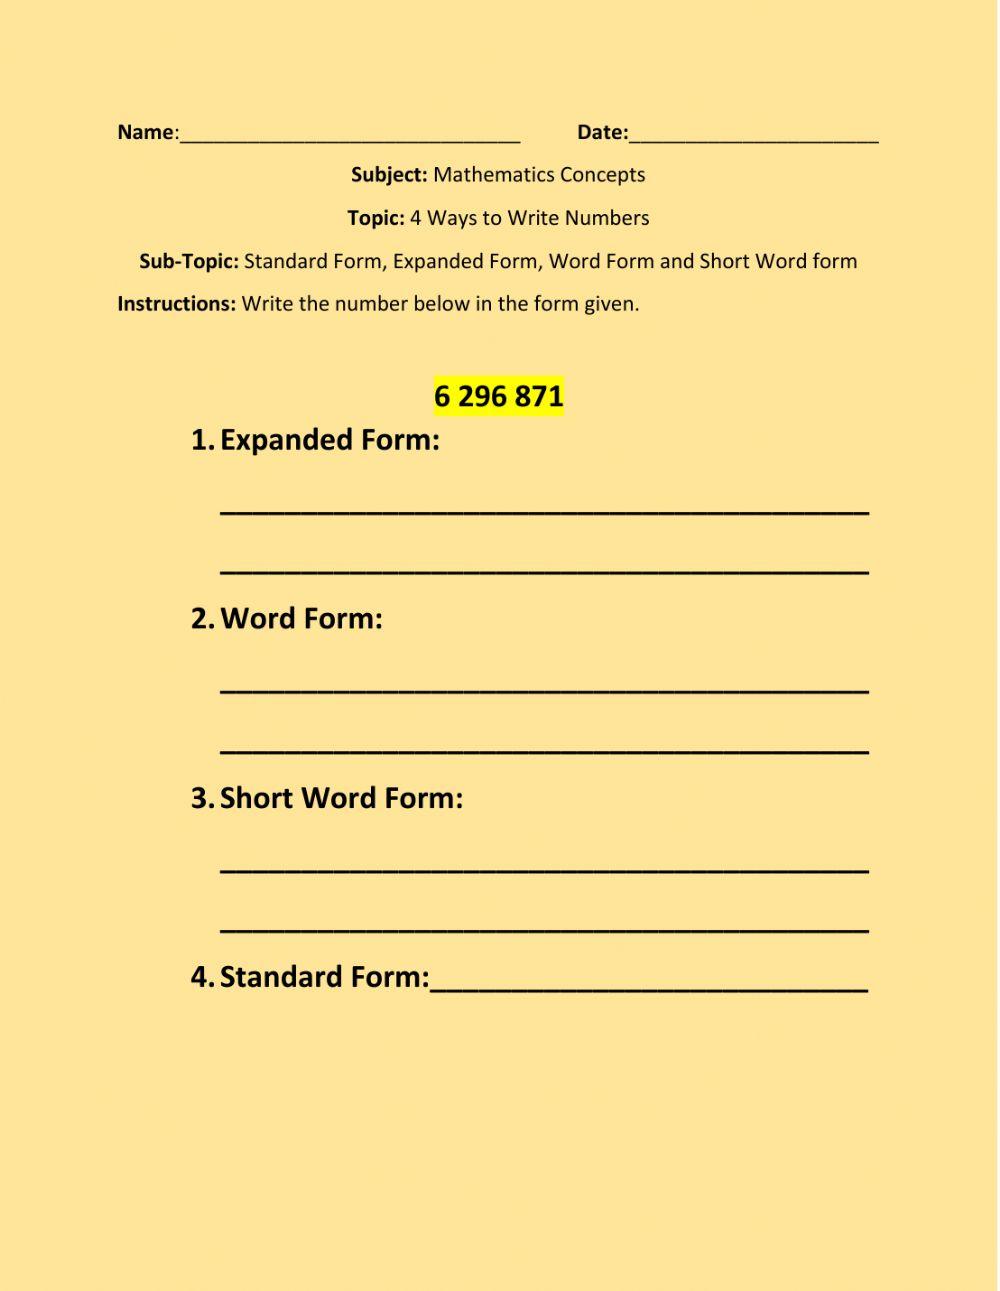 4 Ways to Write Numbers- Standard Form, Expanded Form, Word Form and Short Word Form-